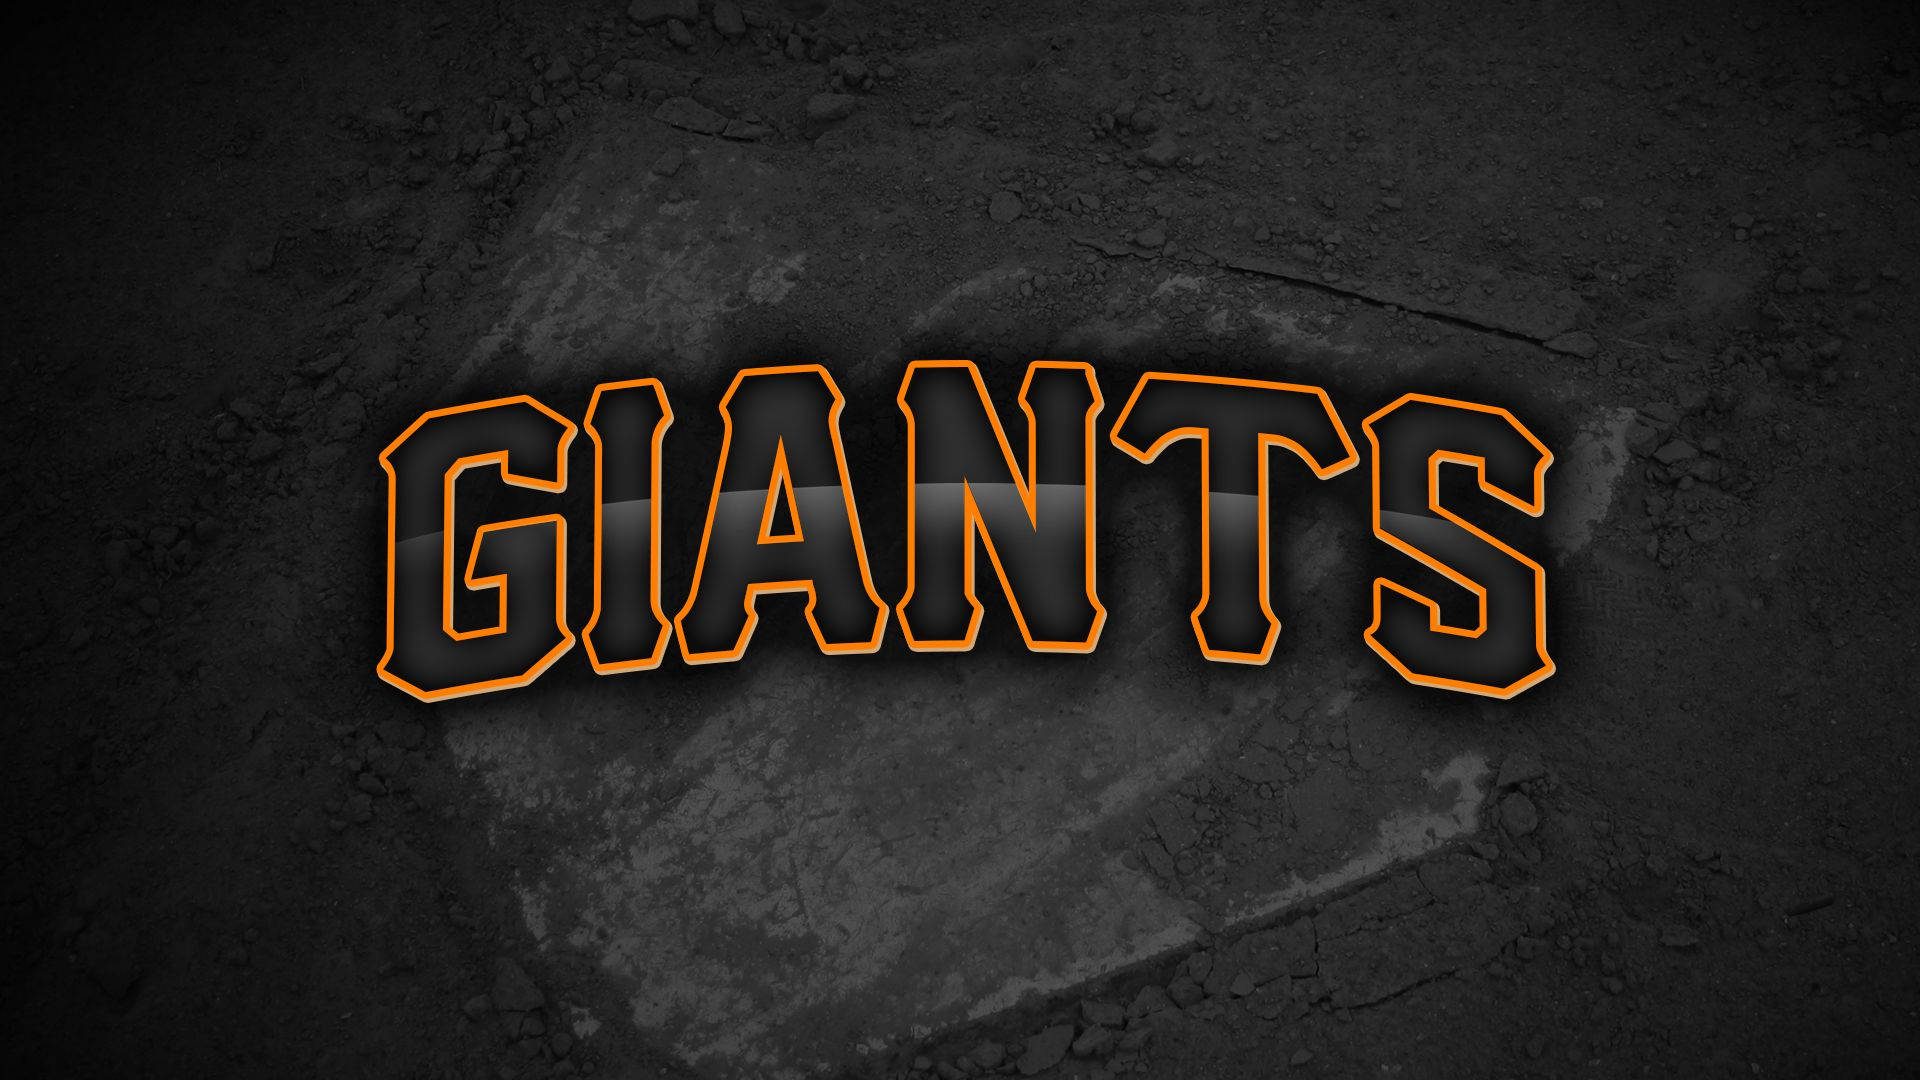 San Francisco Giants On Cement Background